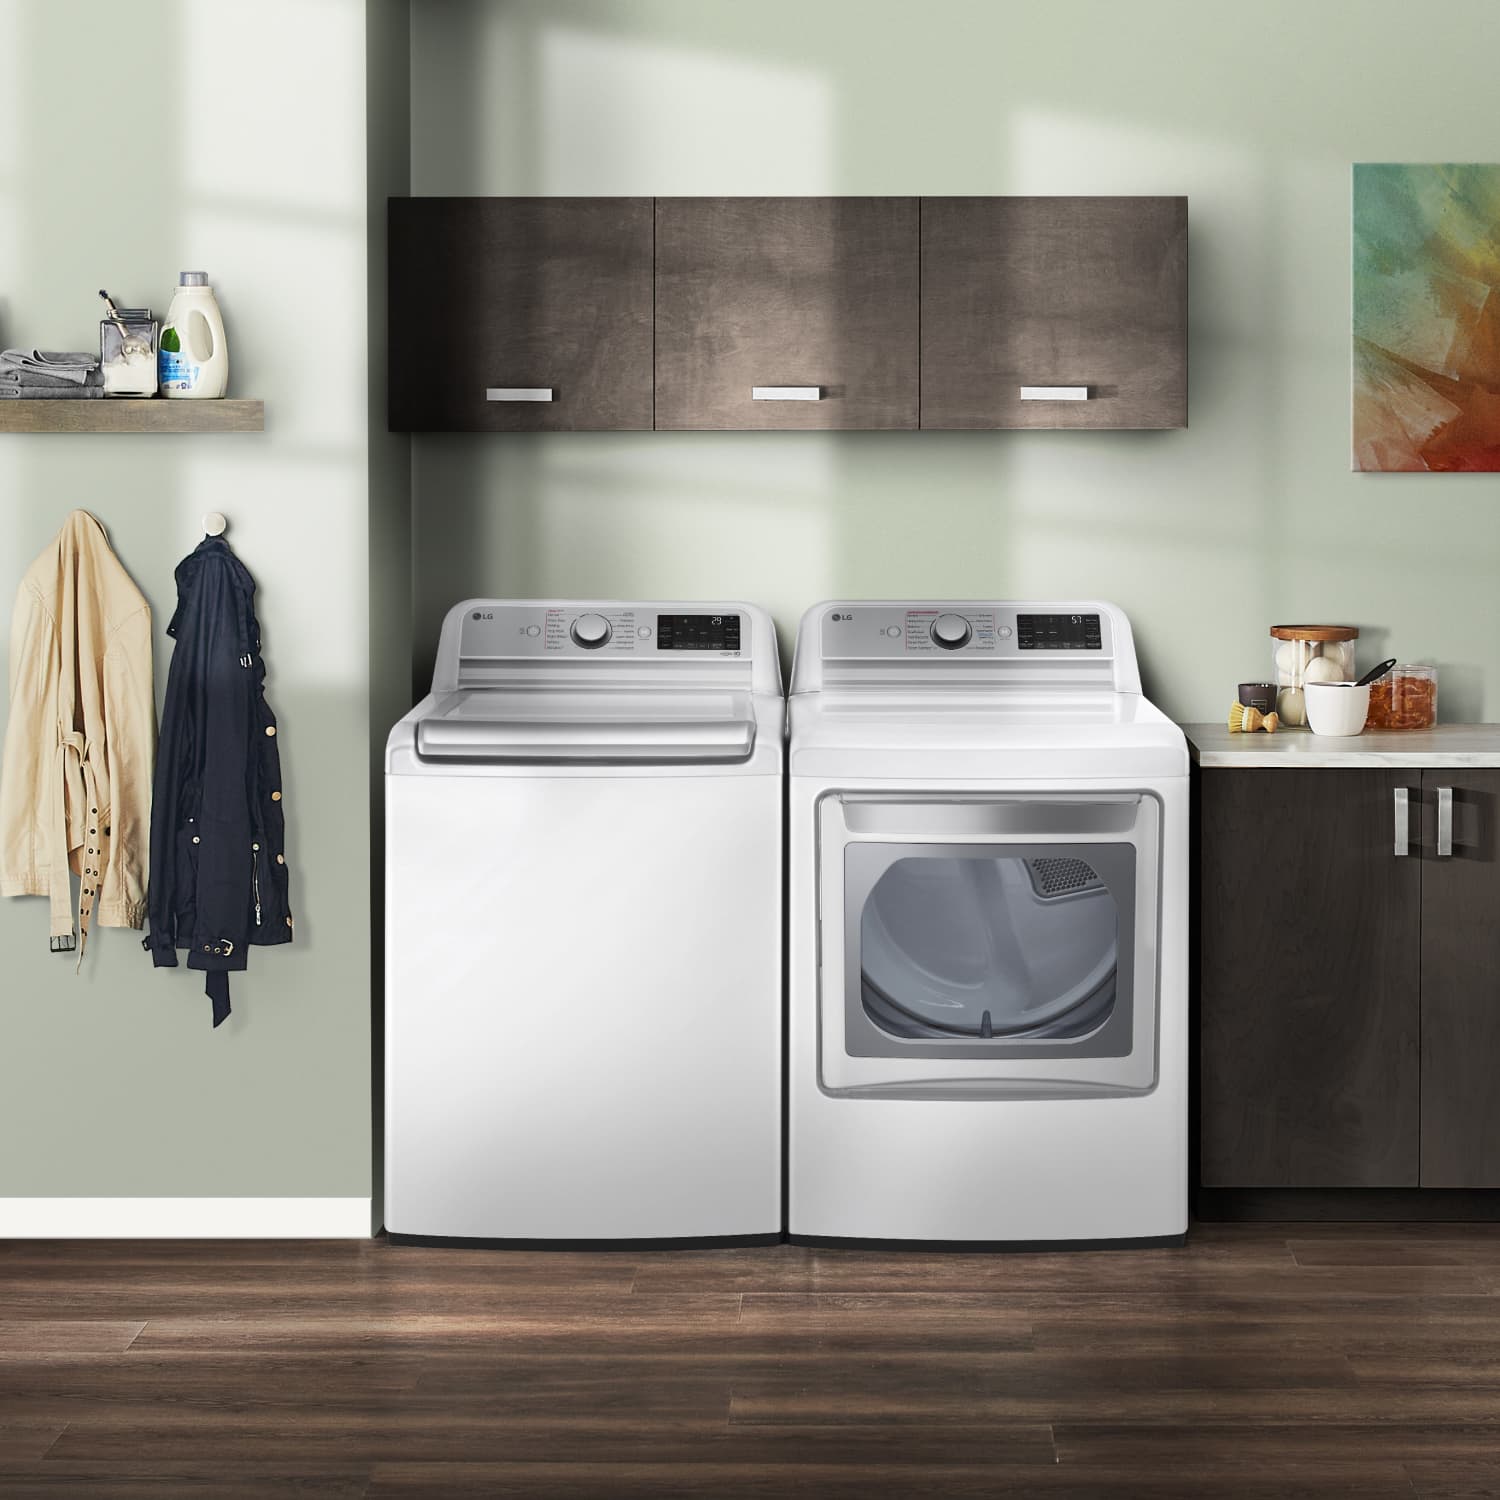 Buy LG Ultra Large Capacity High Efficiency Front Control Top Load Washer